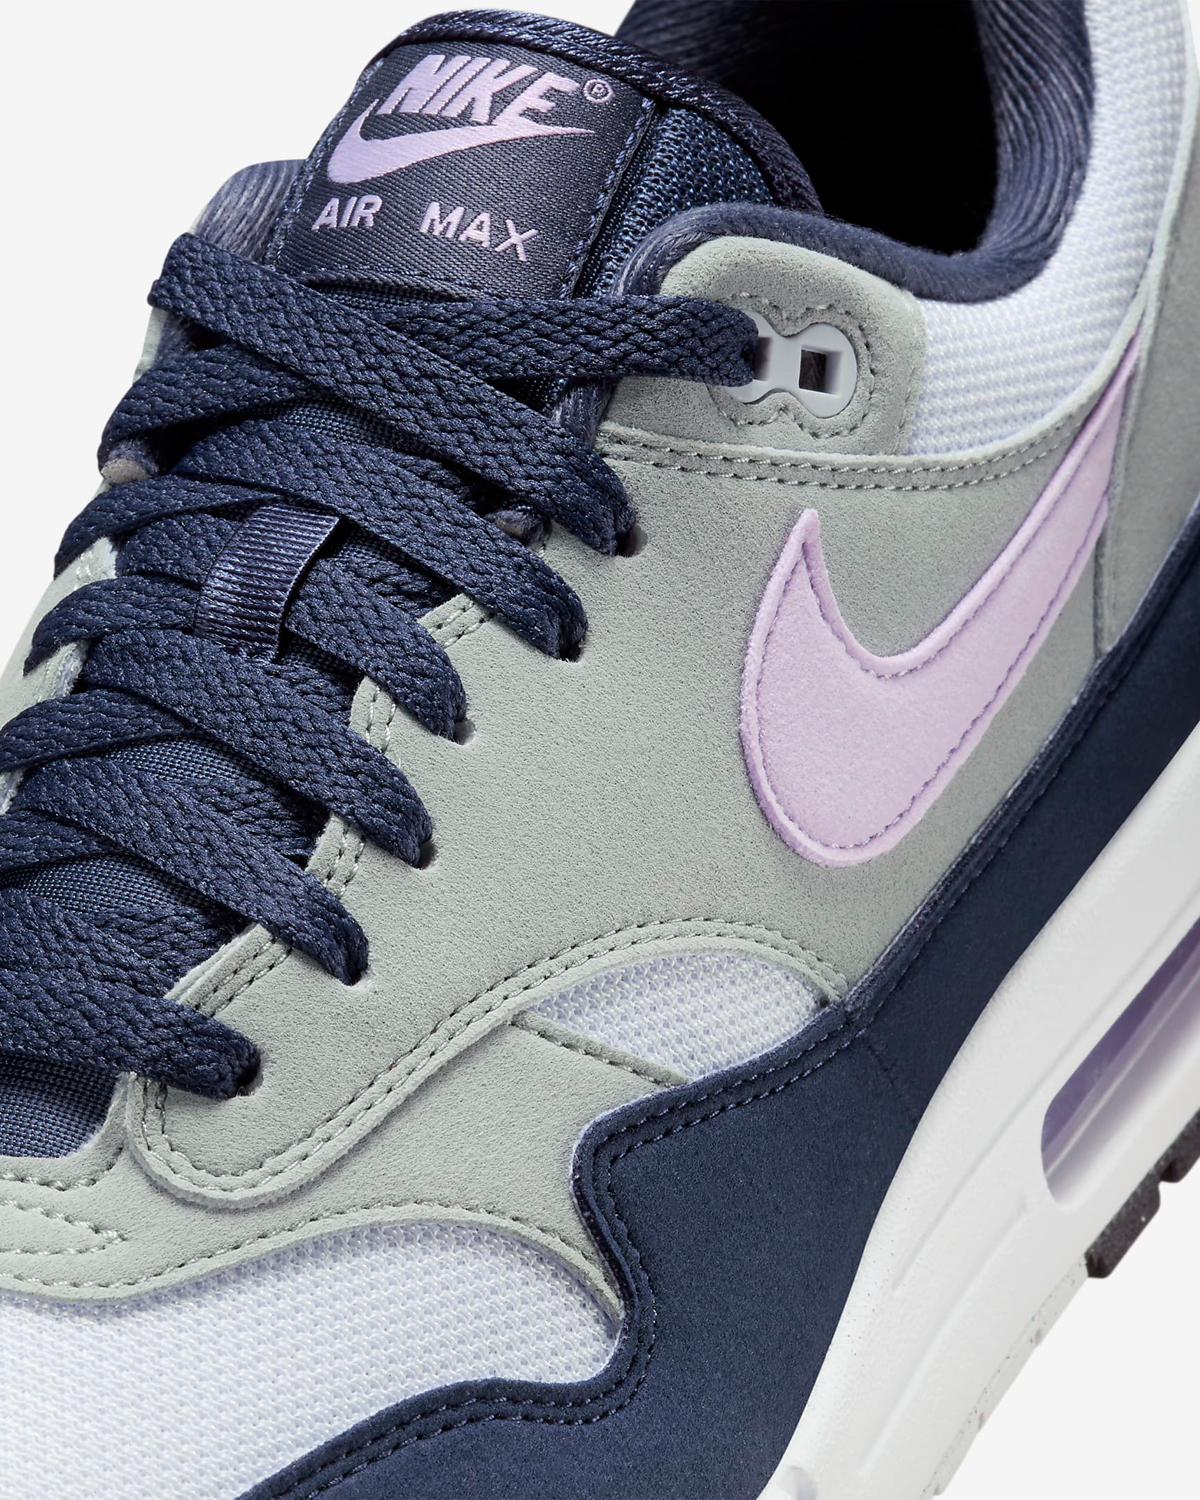 Nike-Air-Max-1-Football-Grey-Thunder-Blue-Lilac-Bloom-Release-Date-7